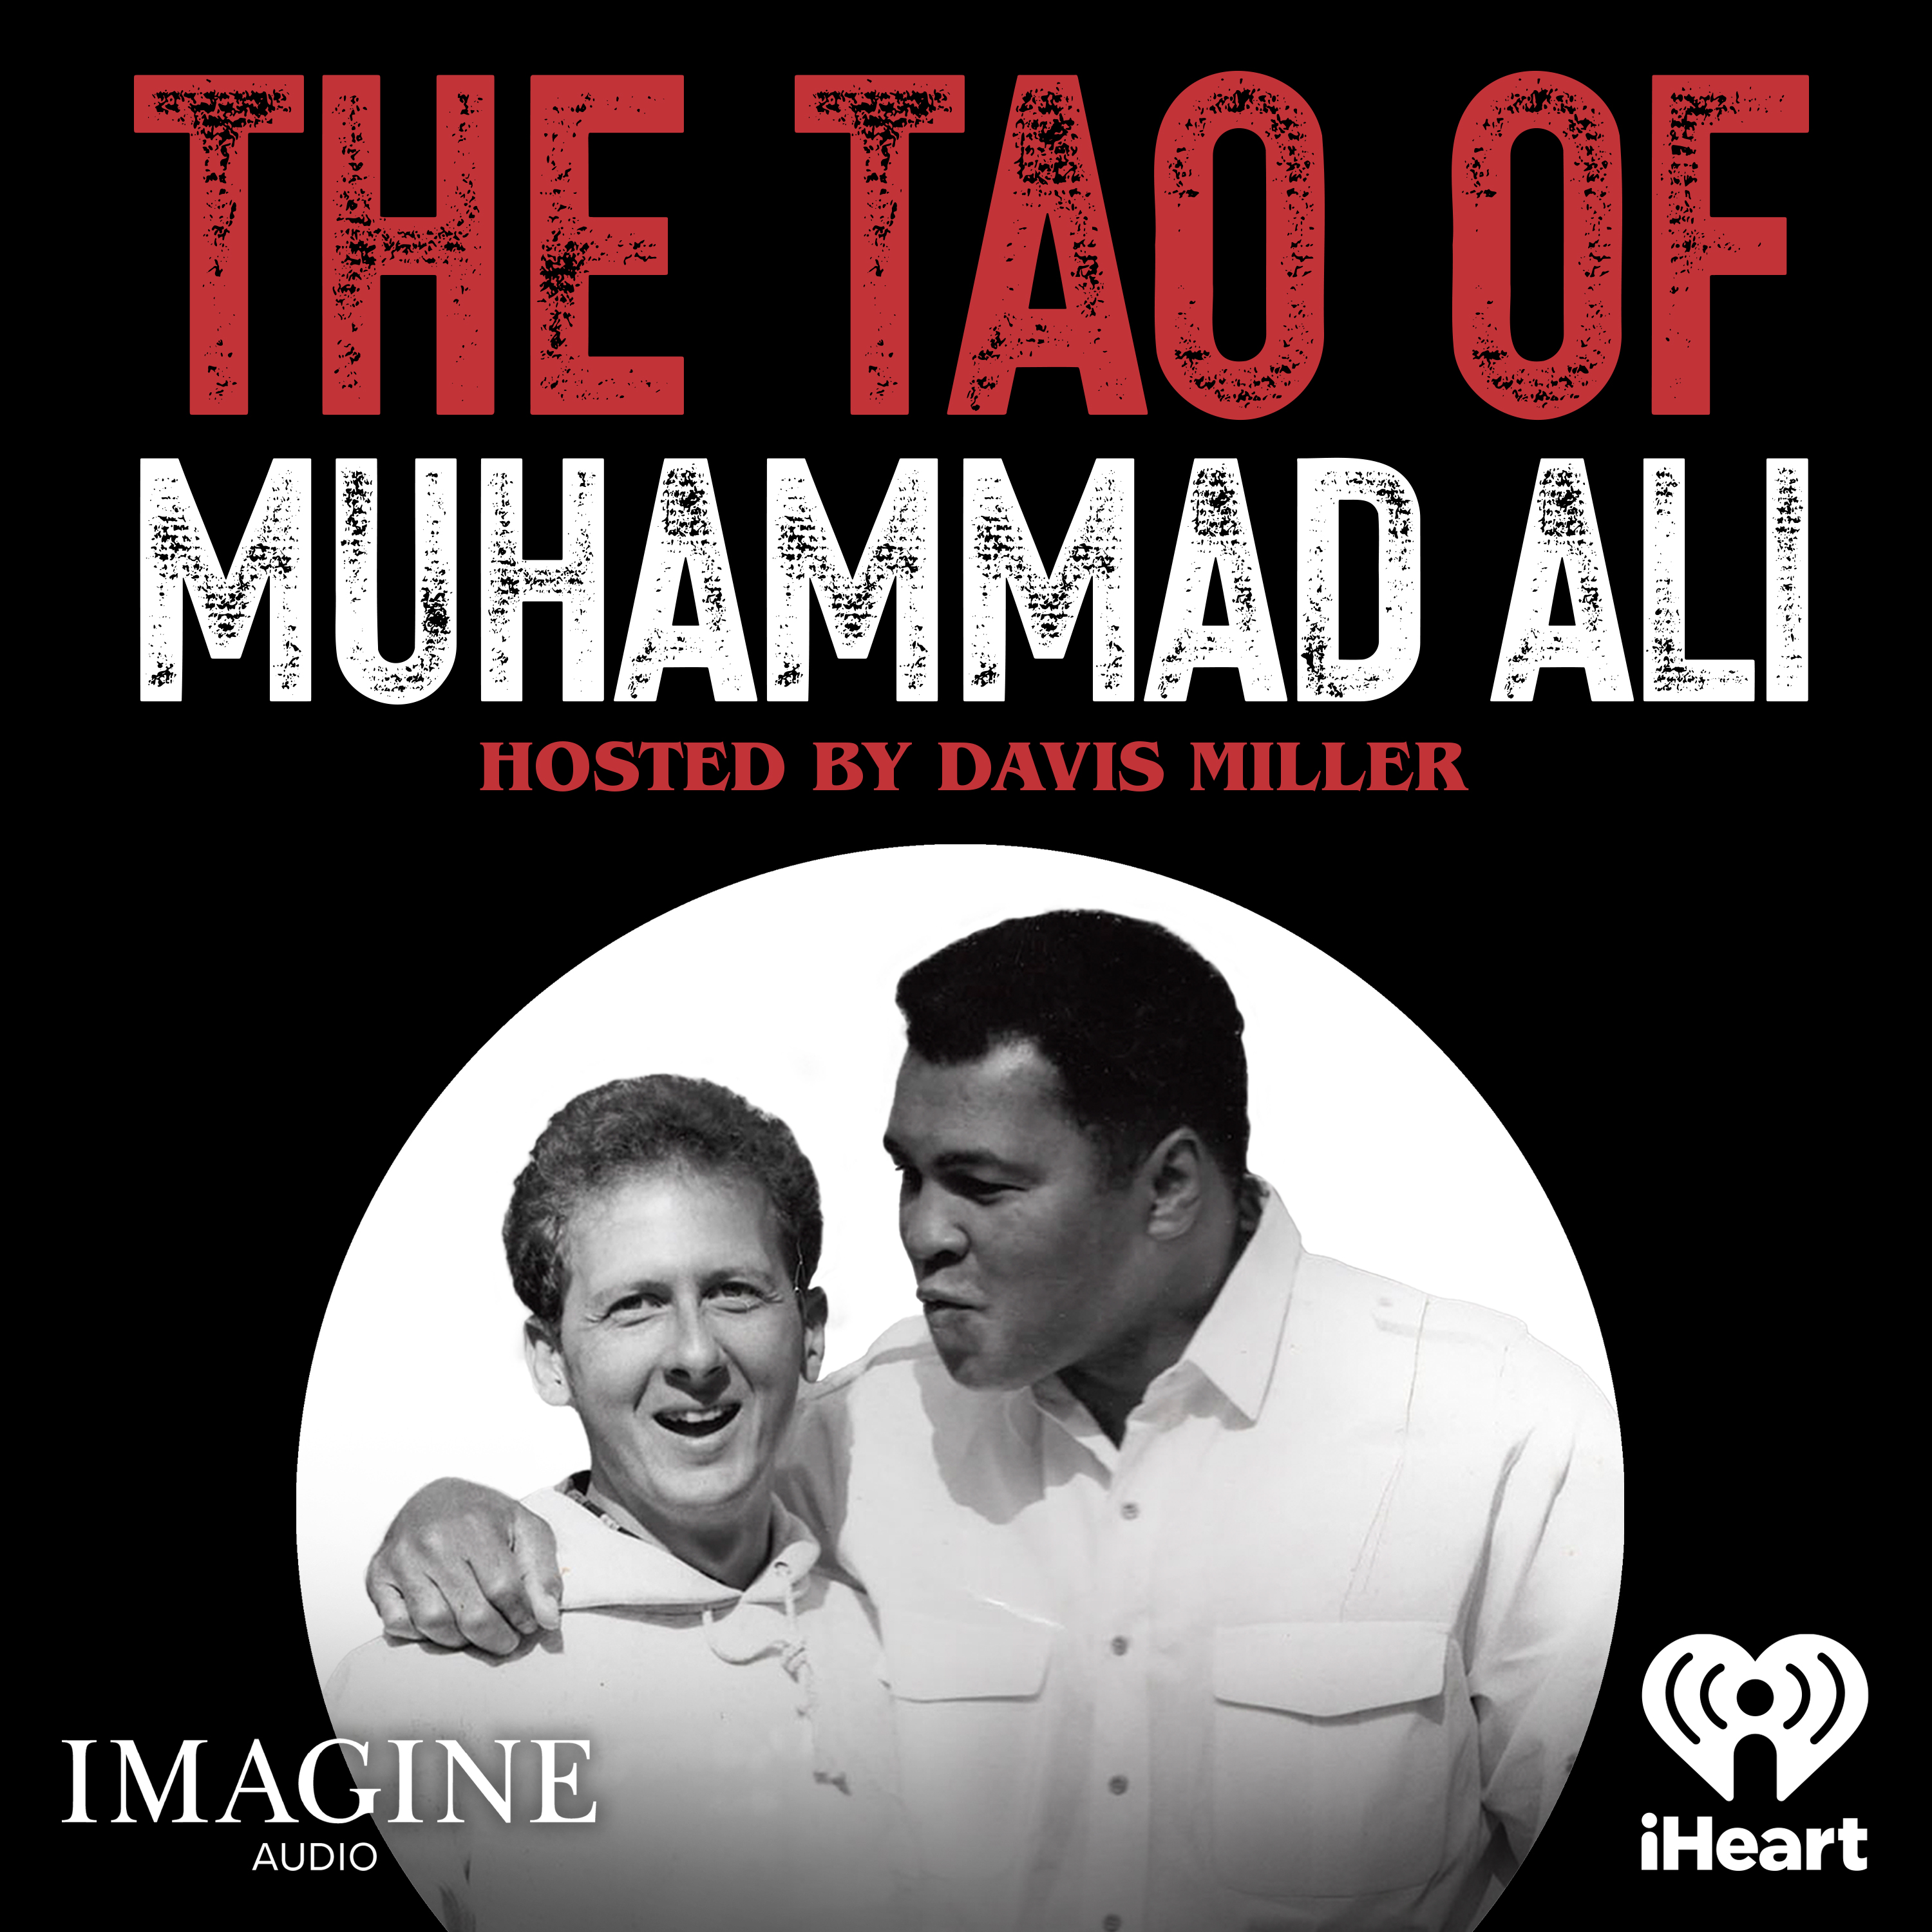 The Tao of Muhammad Ali: E6 The People's Champ (with Tyrone Monaghan)